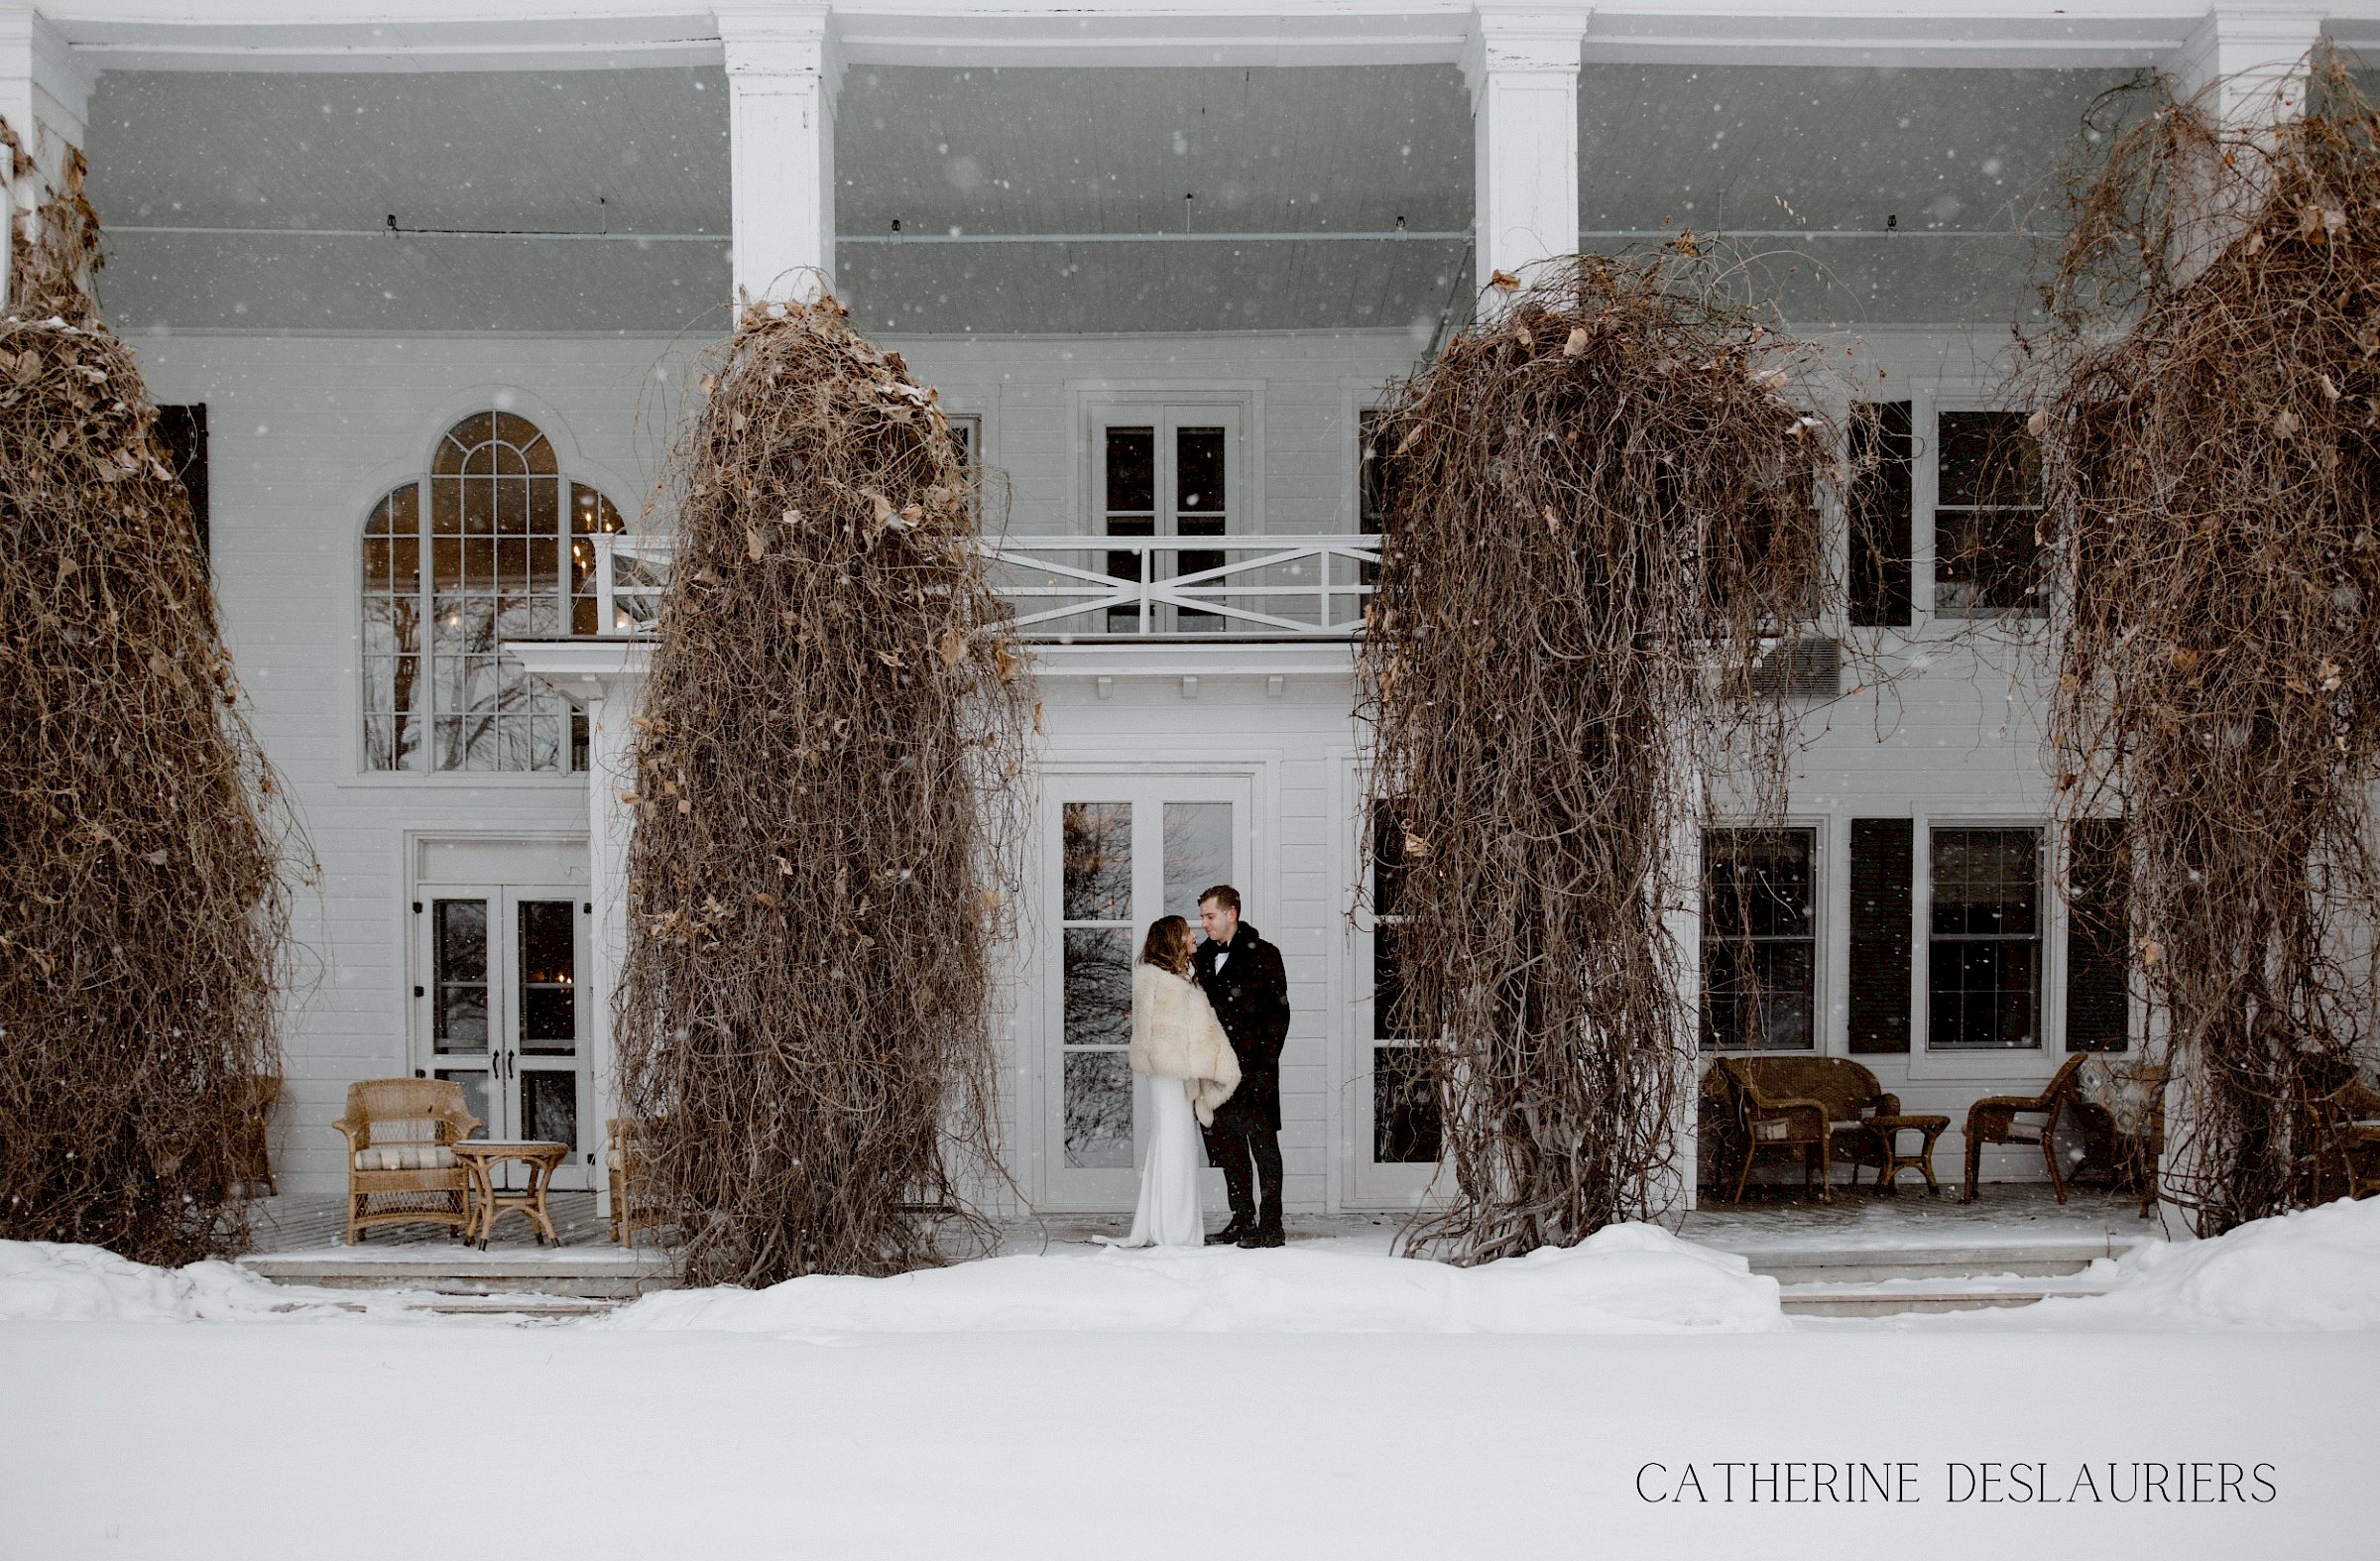 Two guests under the snowflakes in front of the main building